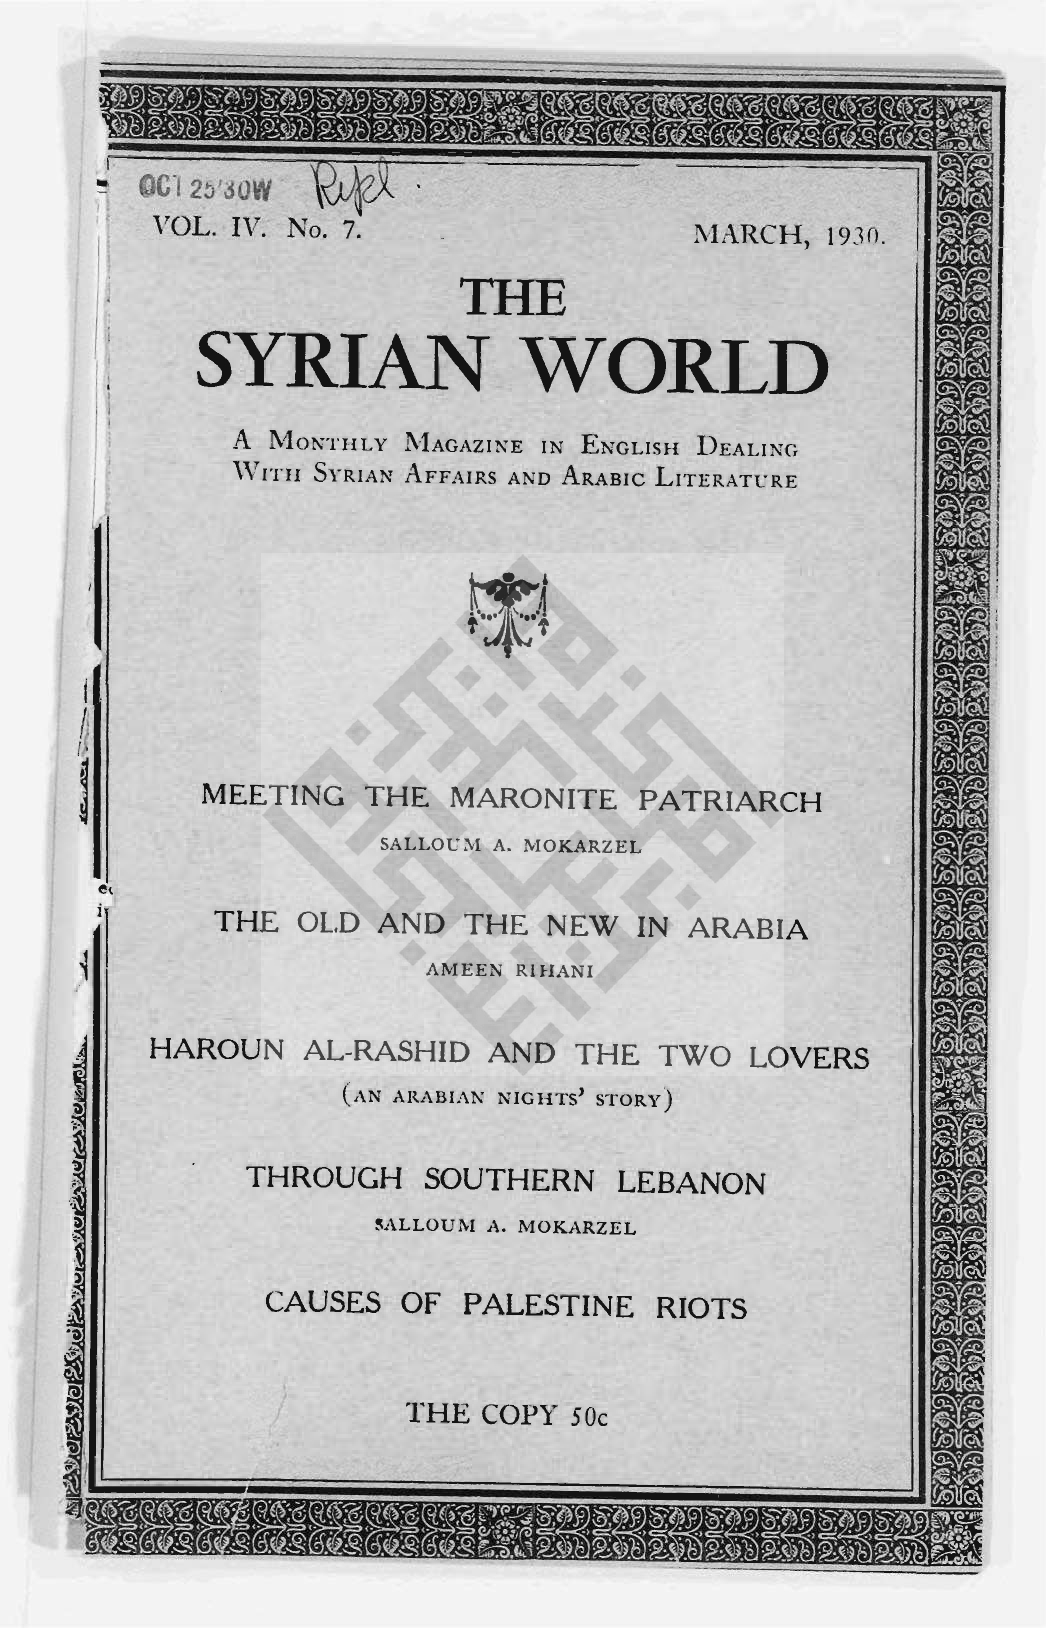 On Giving and Taking, The Syrian World, 4, 7, March 1930, p. 32